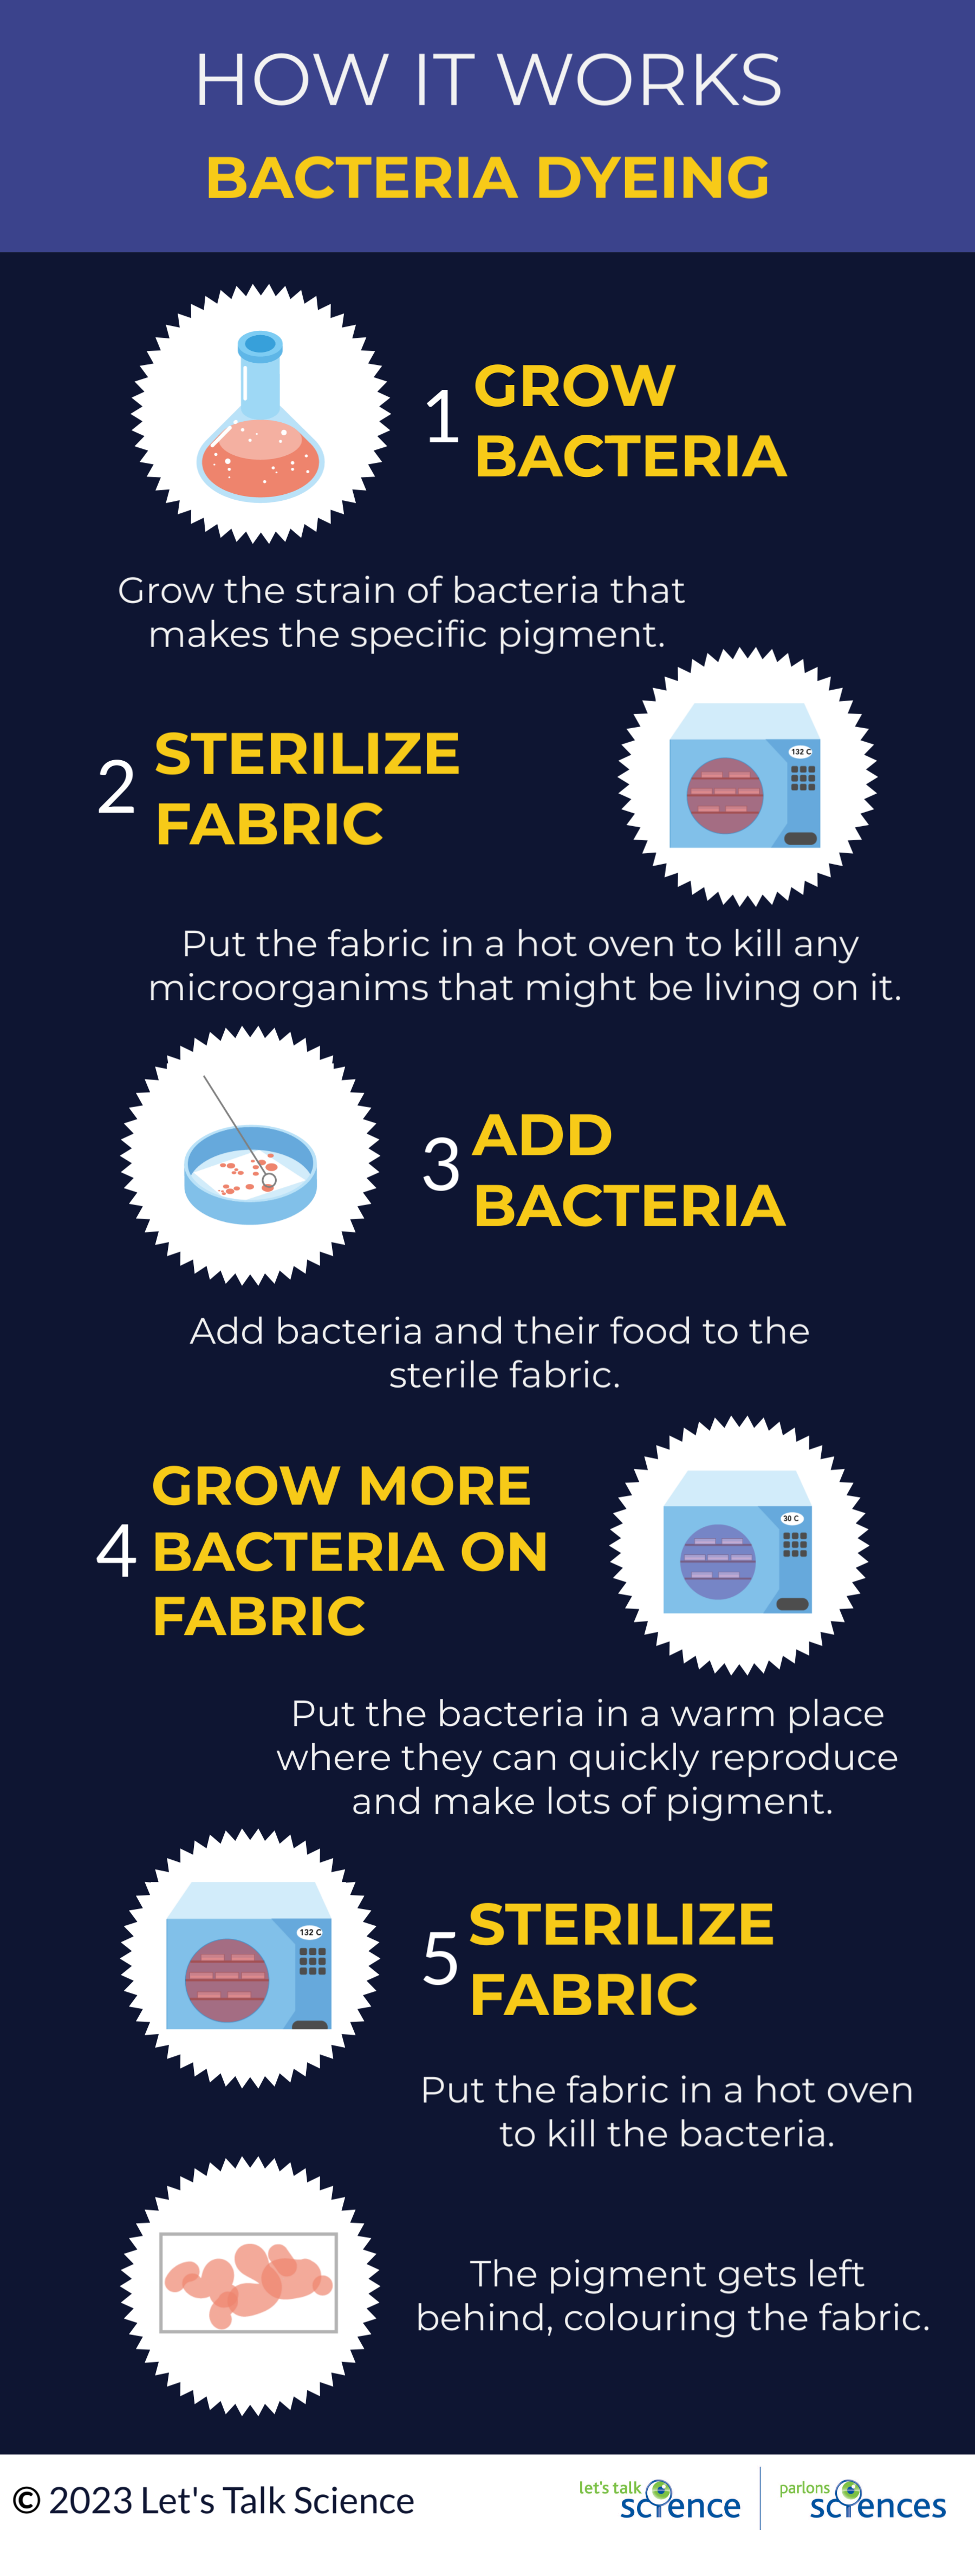 Shown is a colour infographic illustrating the five steps of bacteria dyeing. 